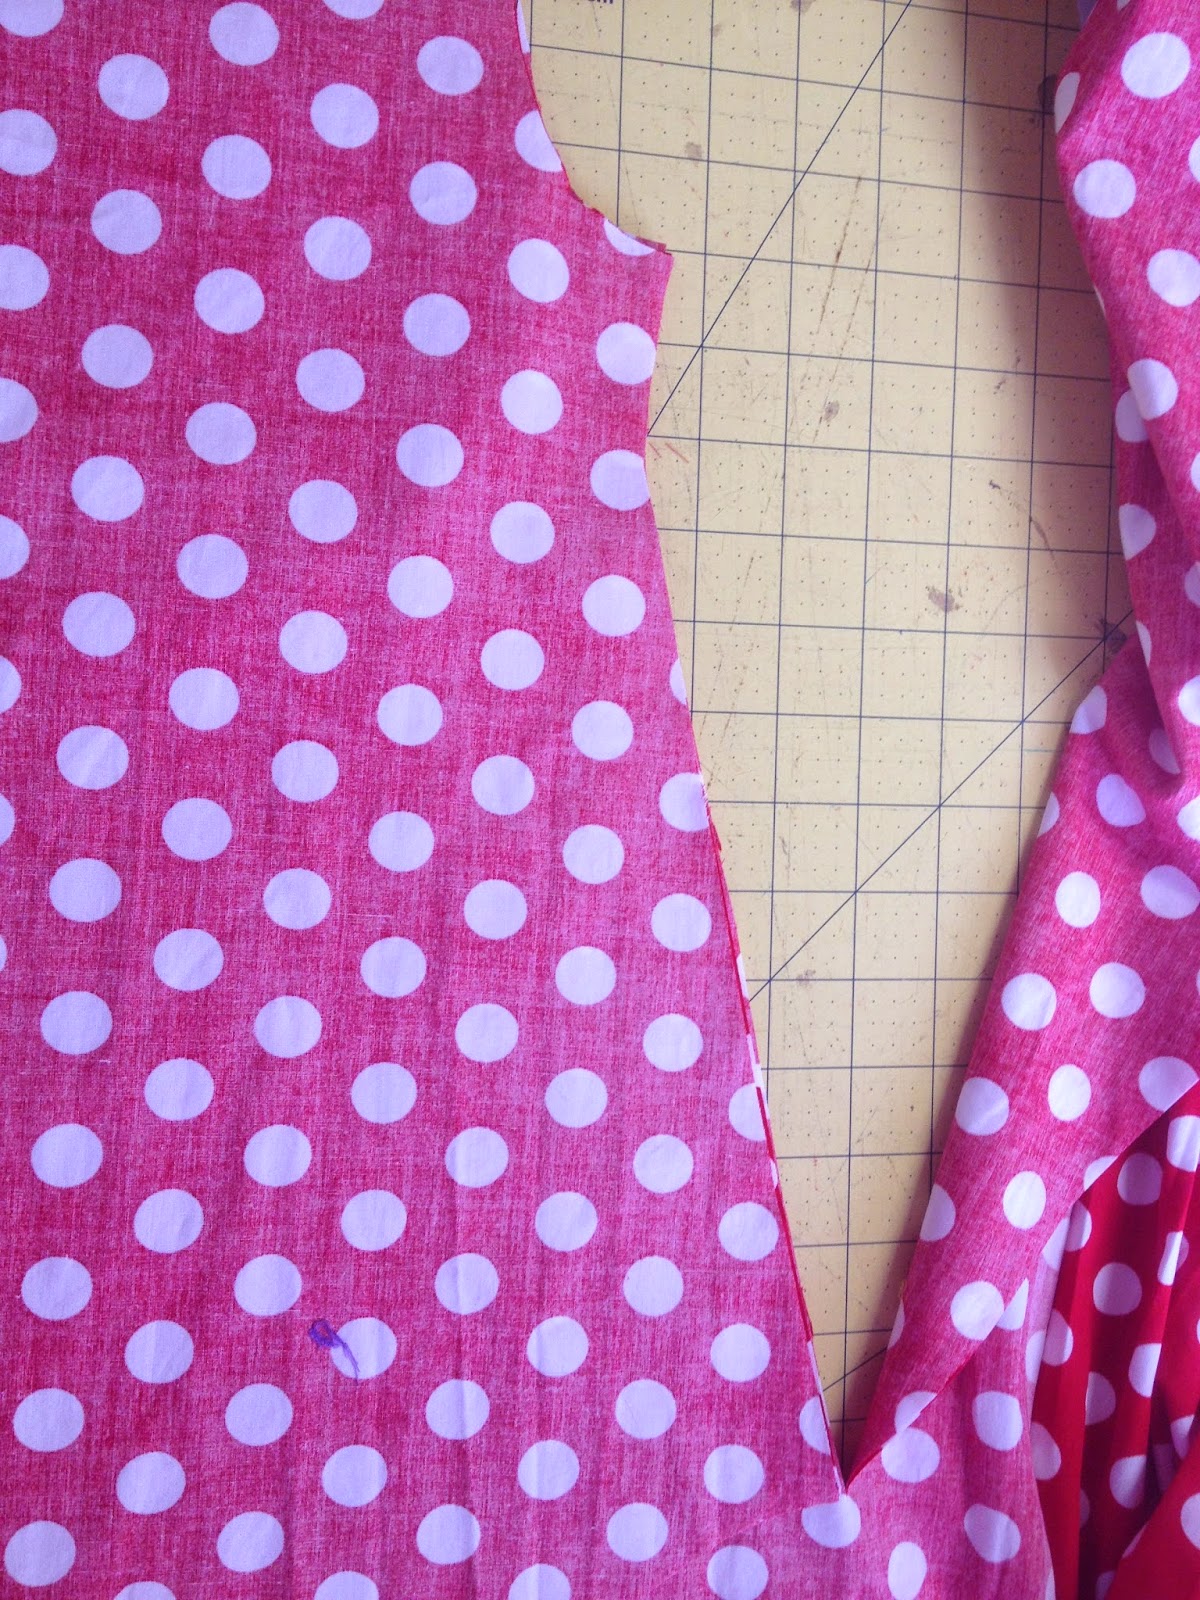 The Scientific Seamstress: Ethan pattern FLIP! By Heather